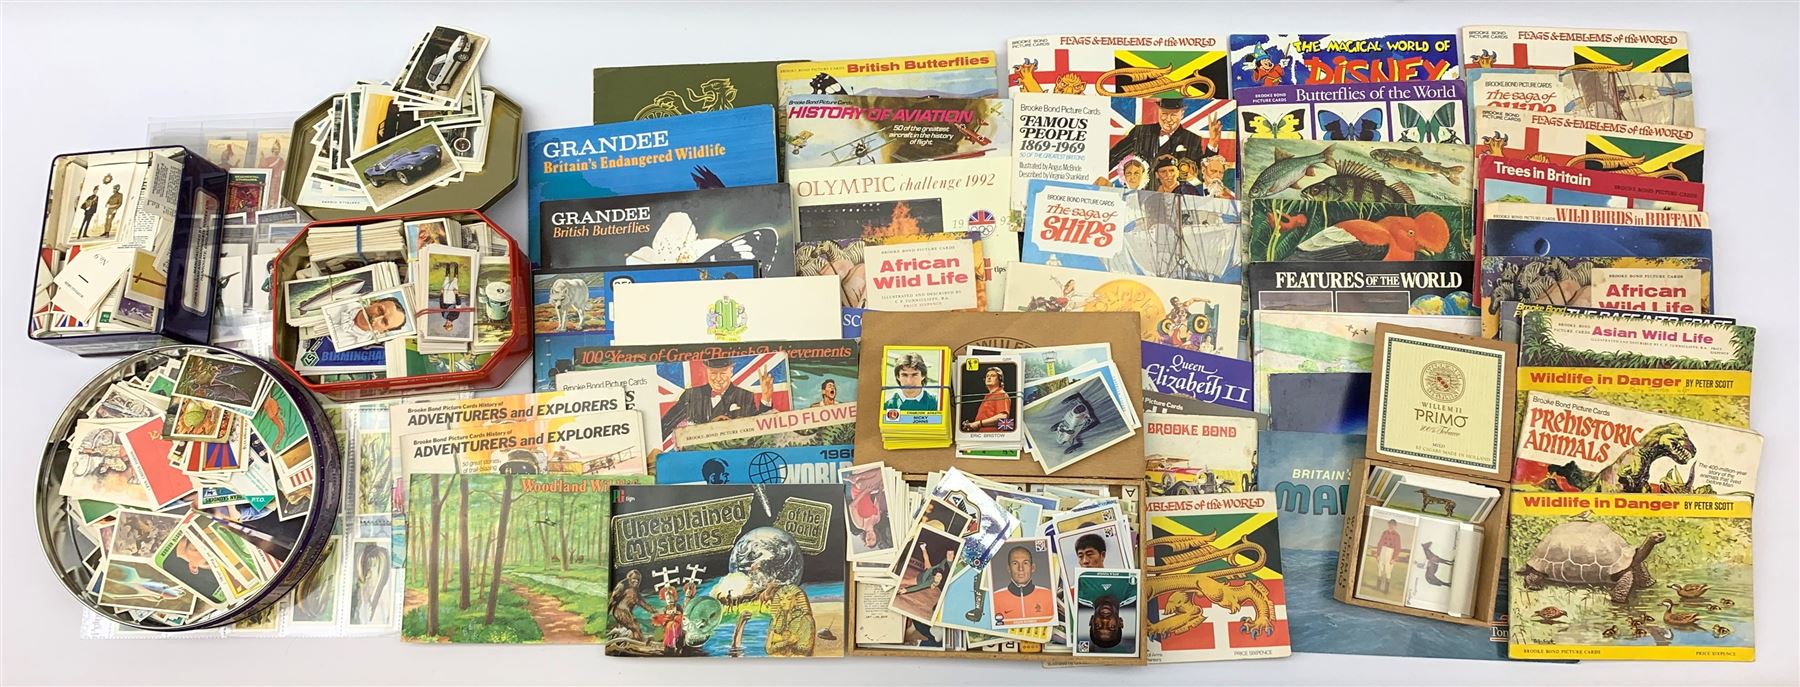 A collection of trade cards and reproduction cigarette cards